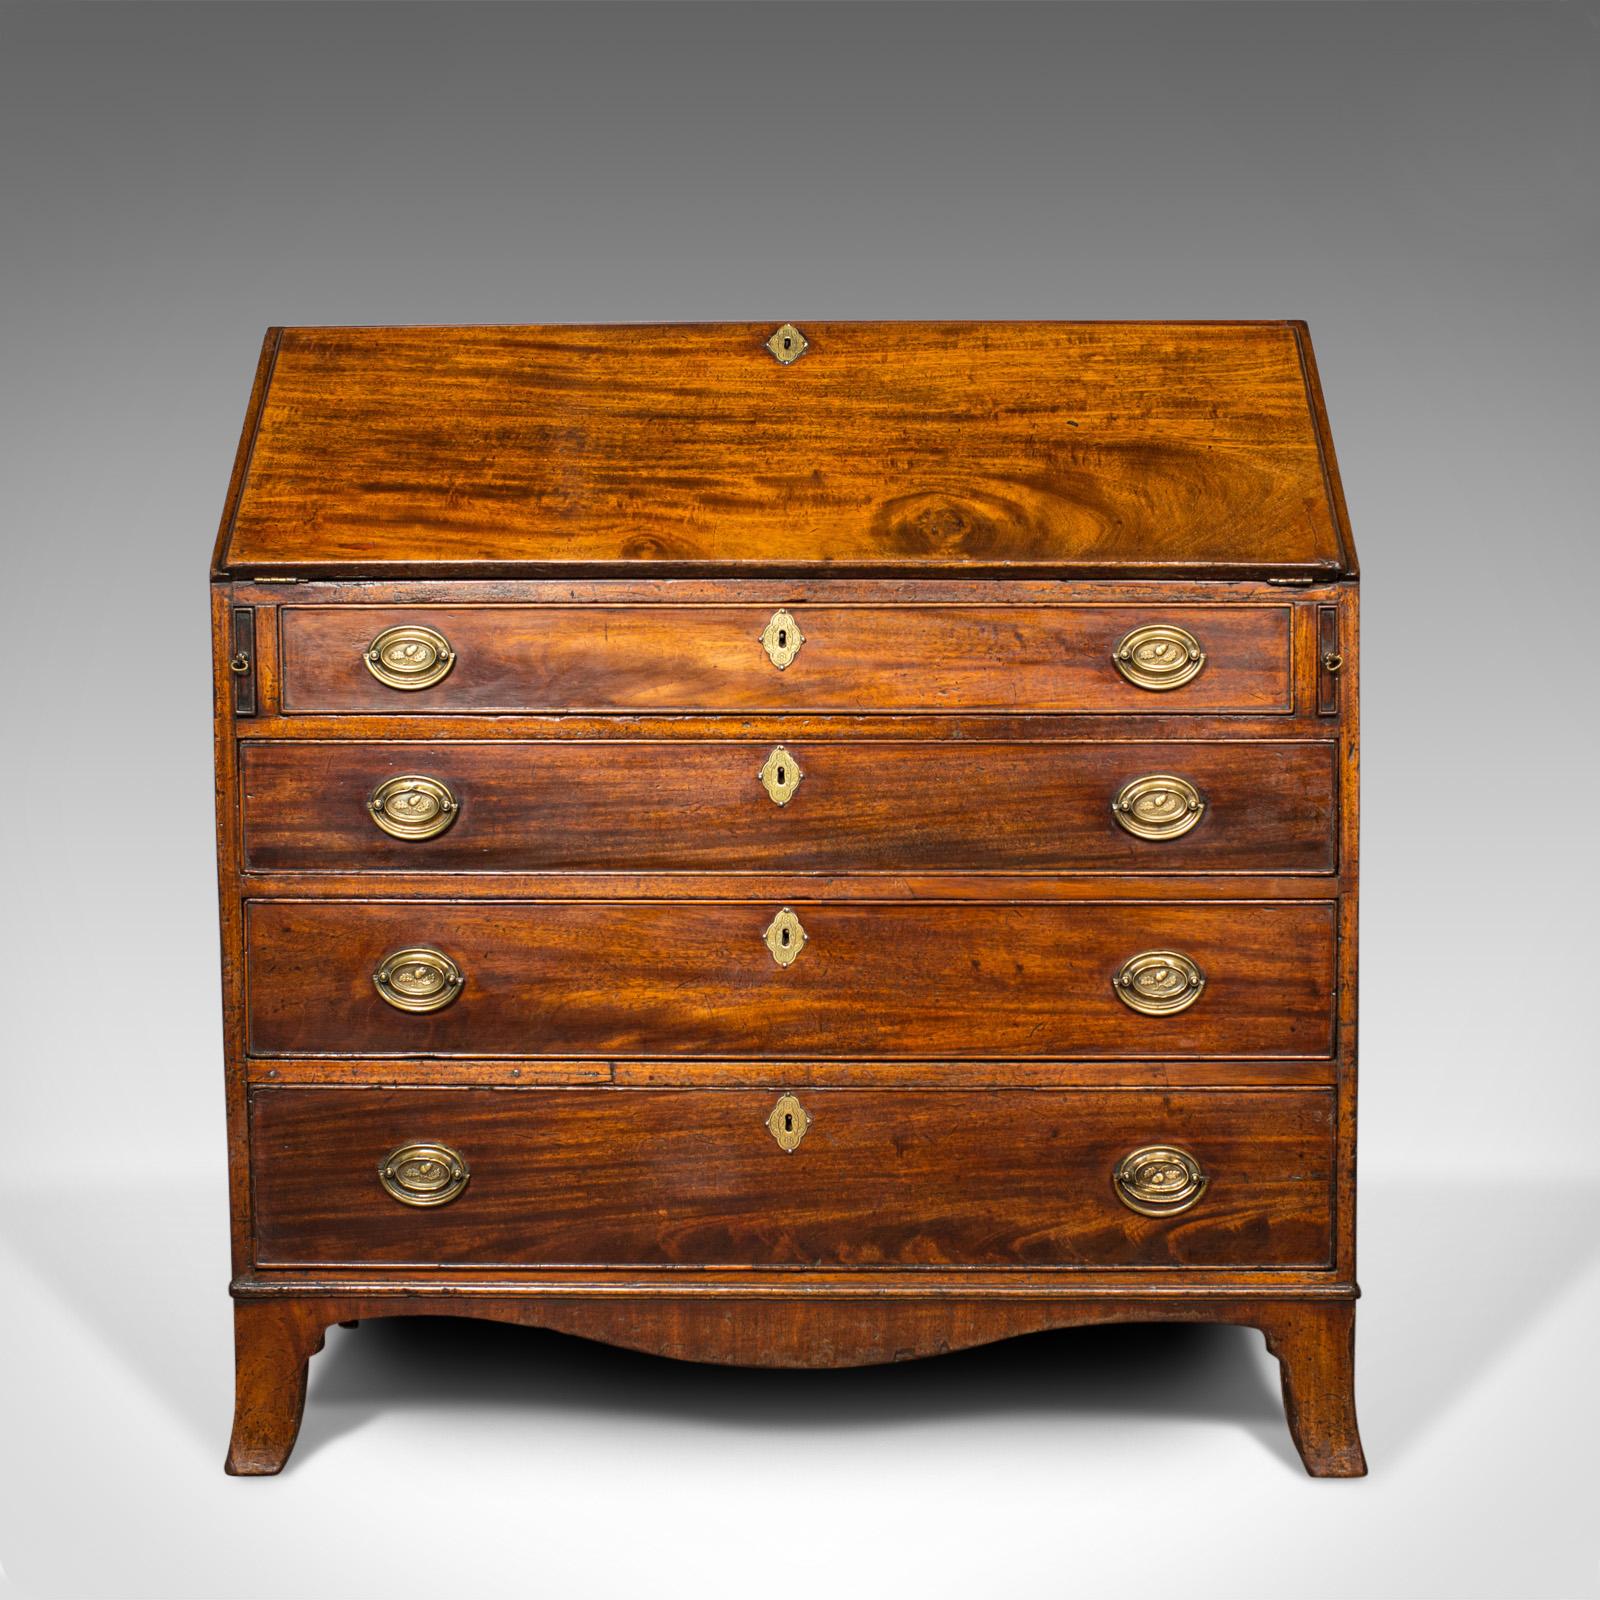 This is an antique bureau. An English, Georgian desk crafted from mahogany in the late 18th century, circa 1790.

Quality craftsmanship in select mahogany with a polished finish
Good consistent color and grain interest throughout
Generous and